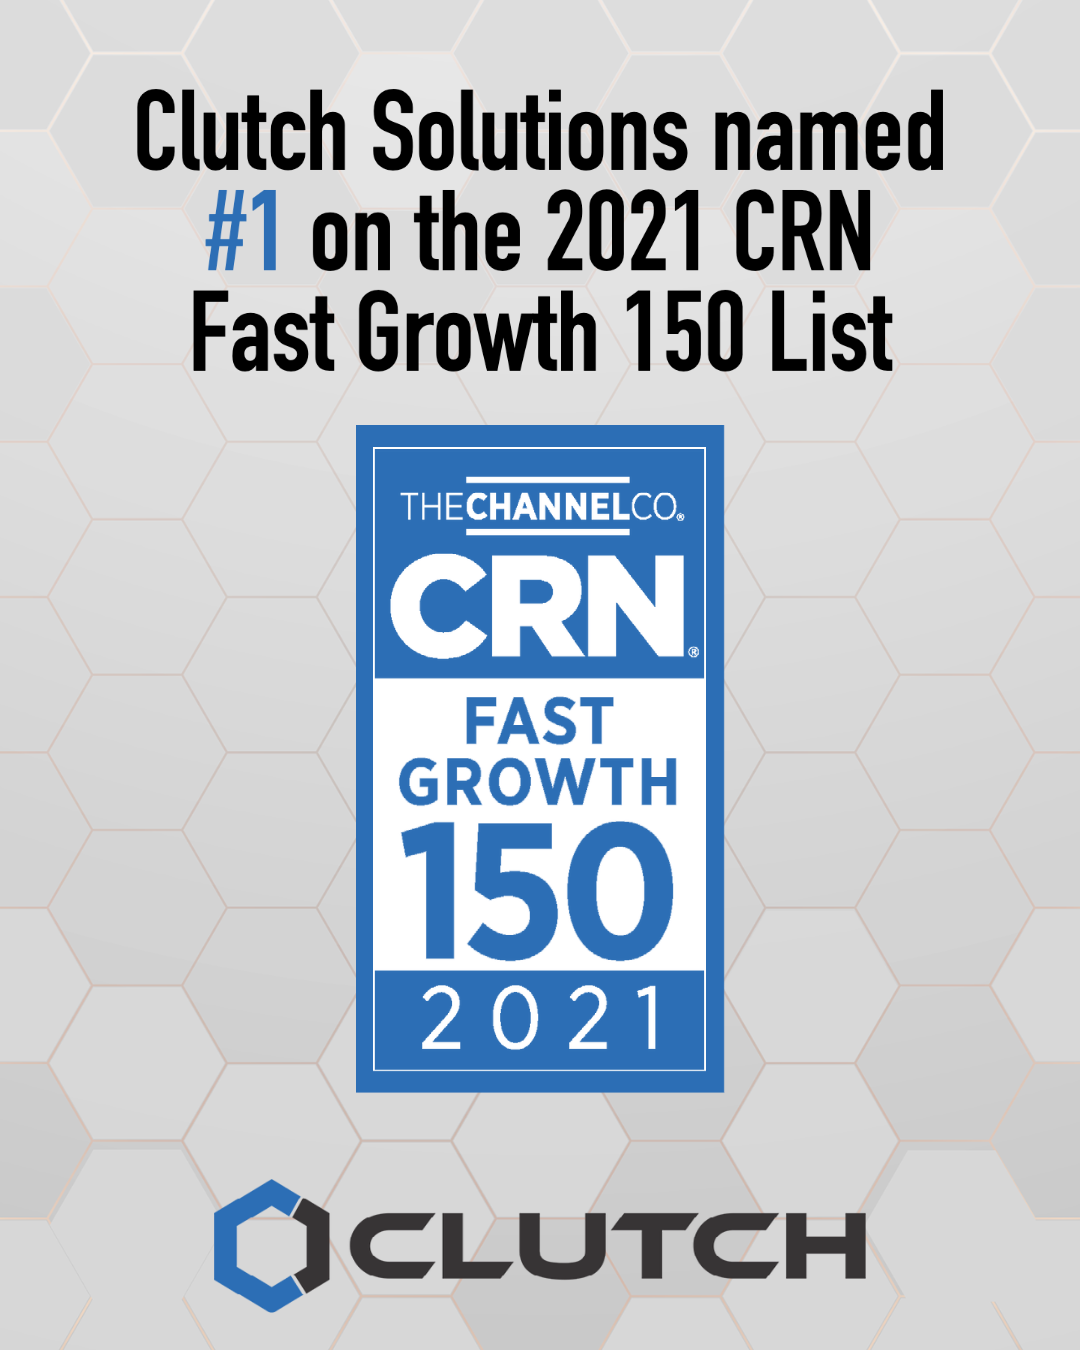 Clutch Solutions Places #1 on the 2021 CRN® Fast Growth 150 List